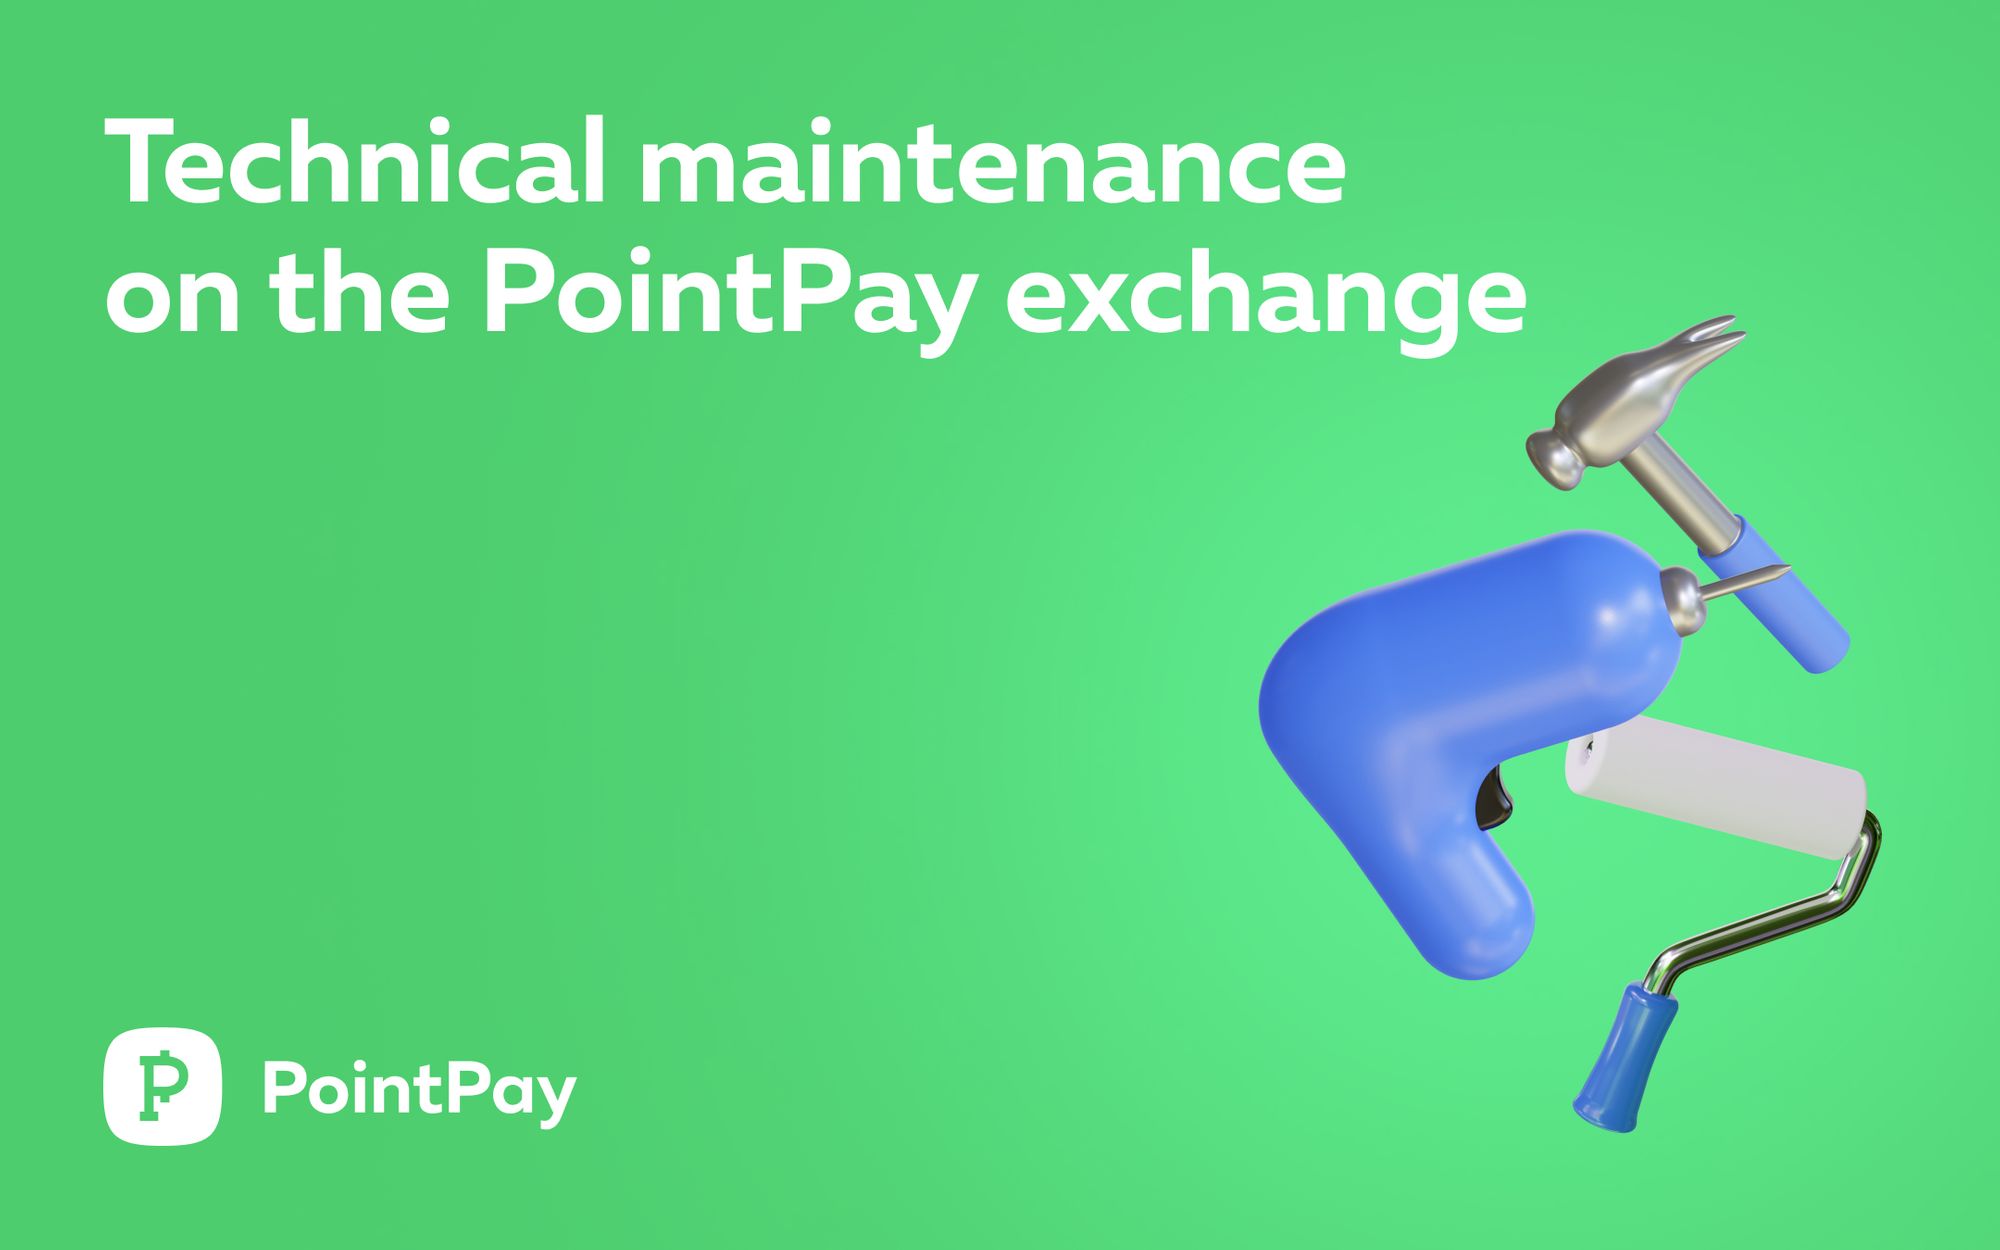 Technical maintenance on the PointPay exchange and related services.